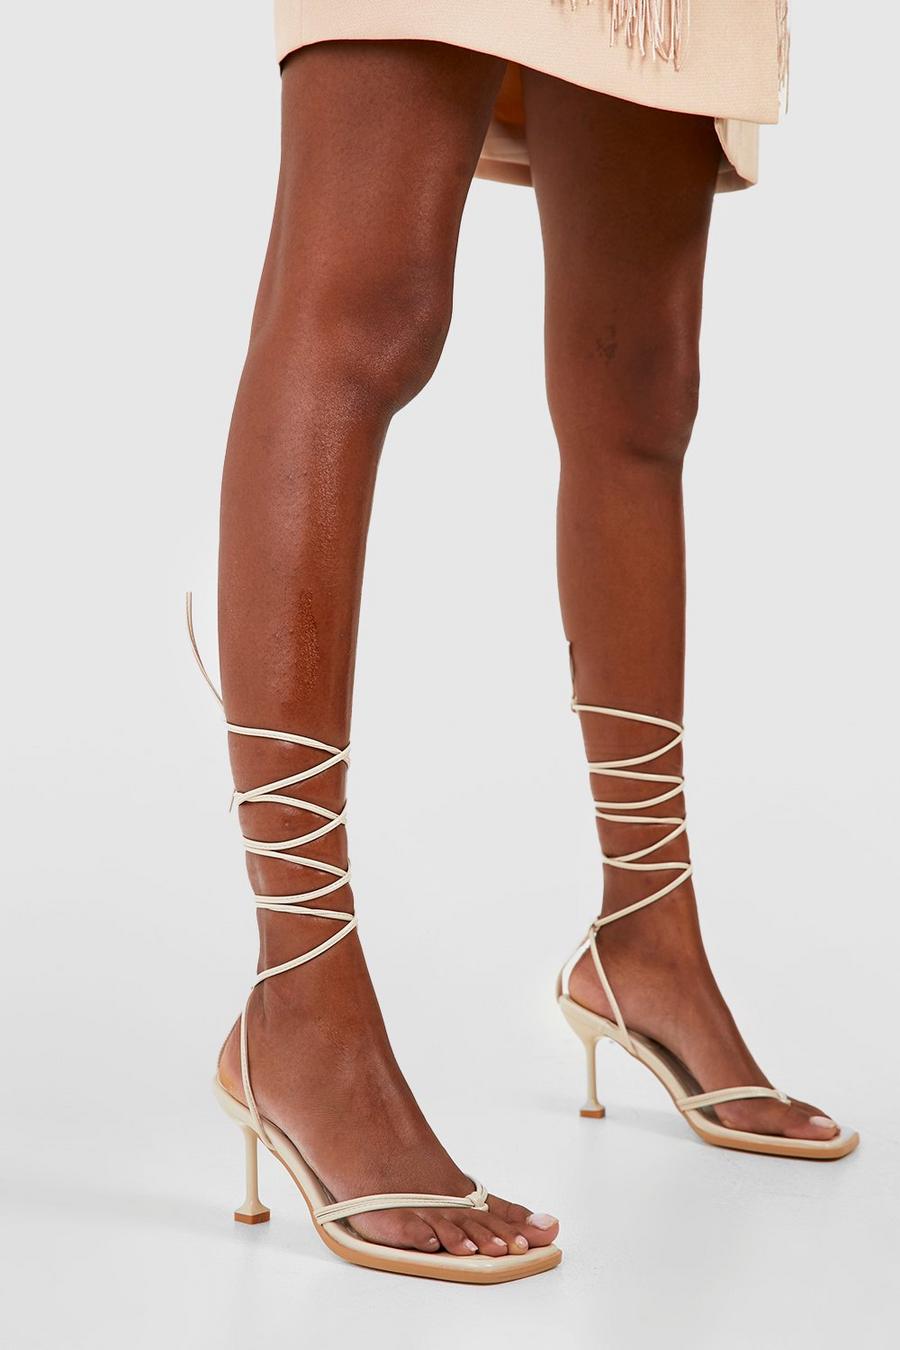 Cream white Padded Insole Strappy Lace Up Heels